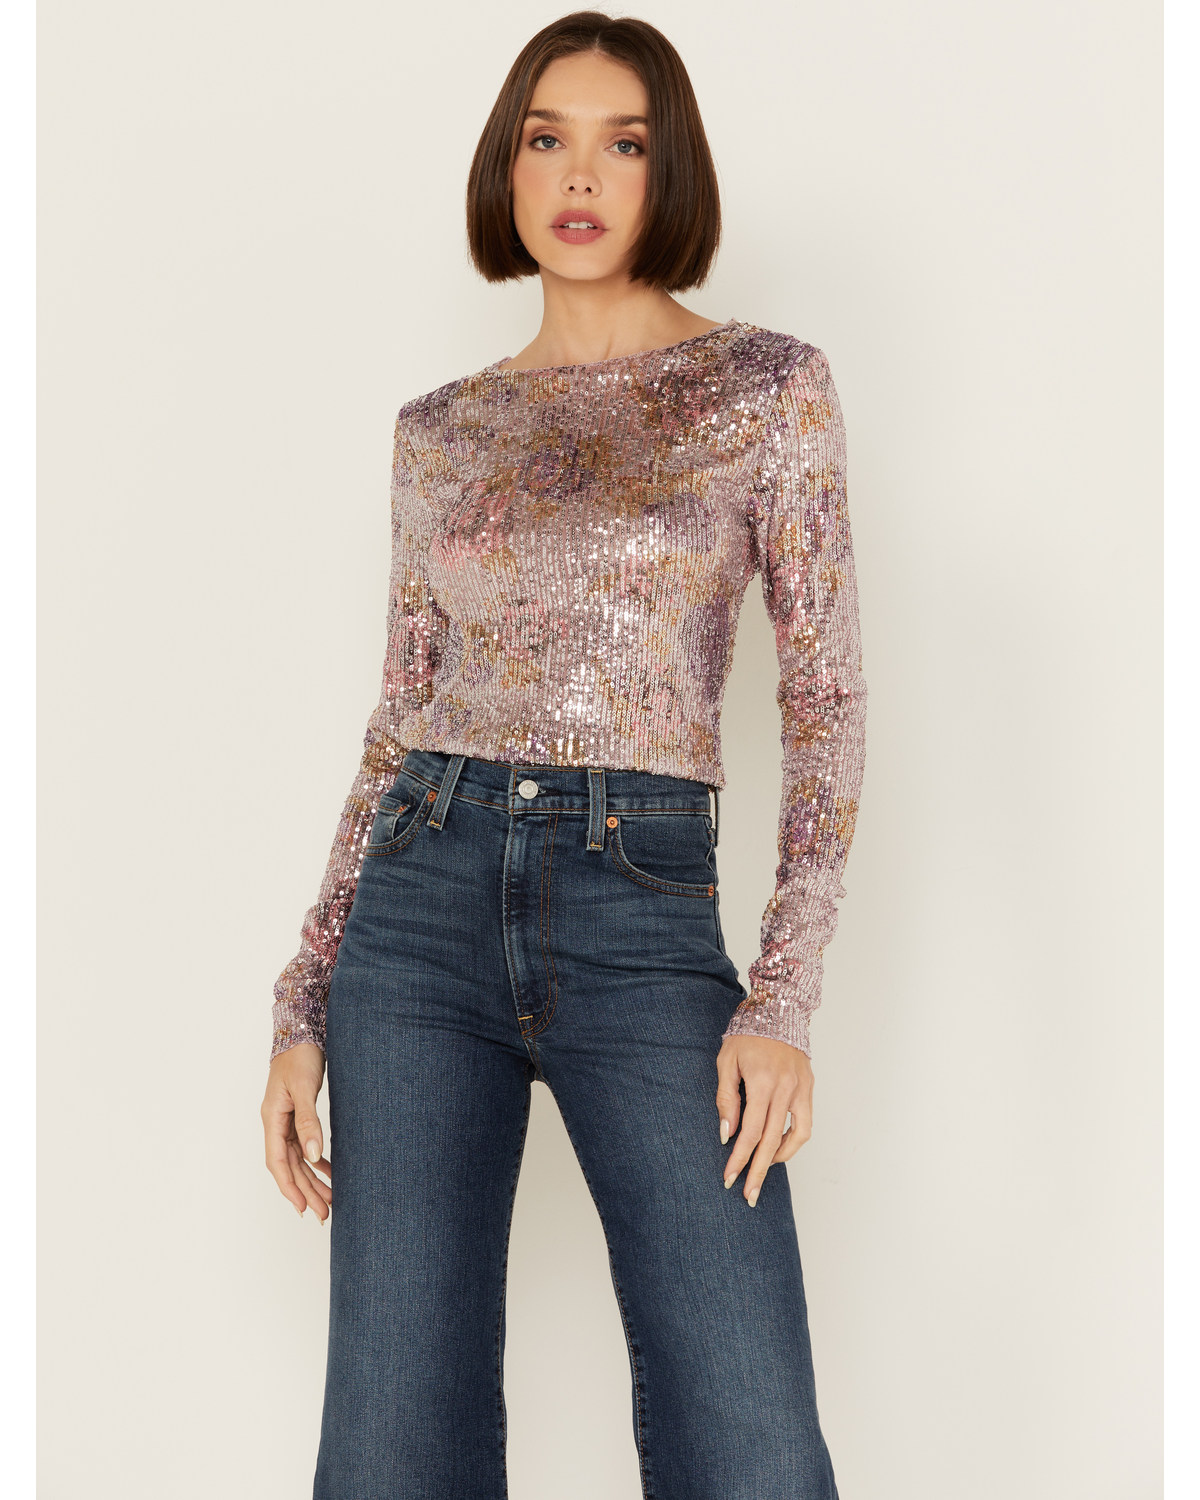 Free People Women's Gold Rush Printed Sequins Long Sleeve Top